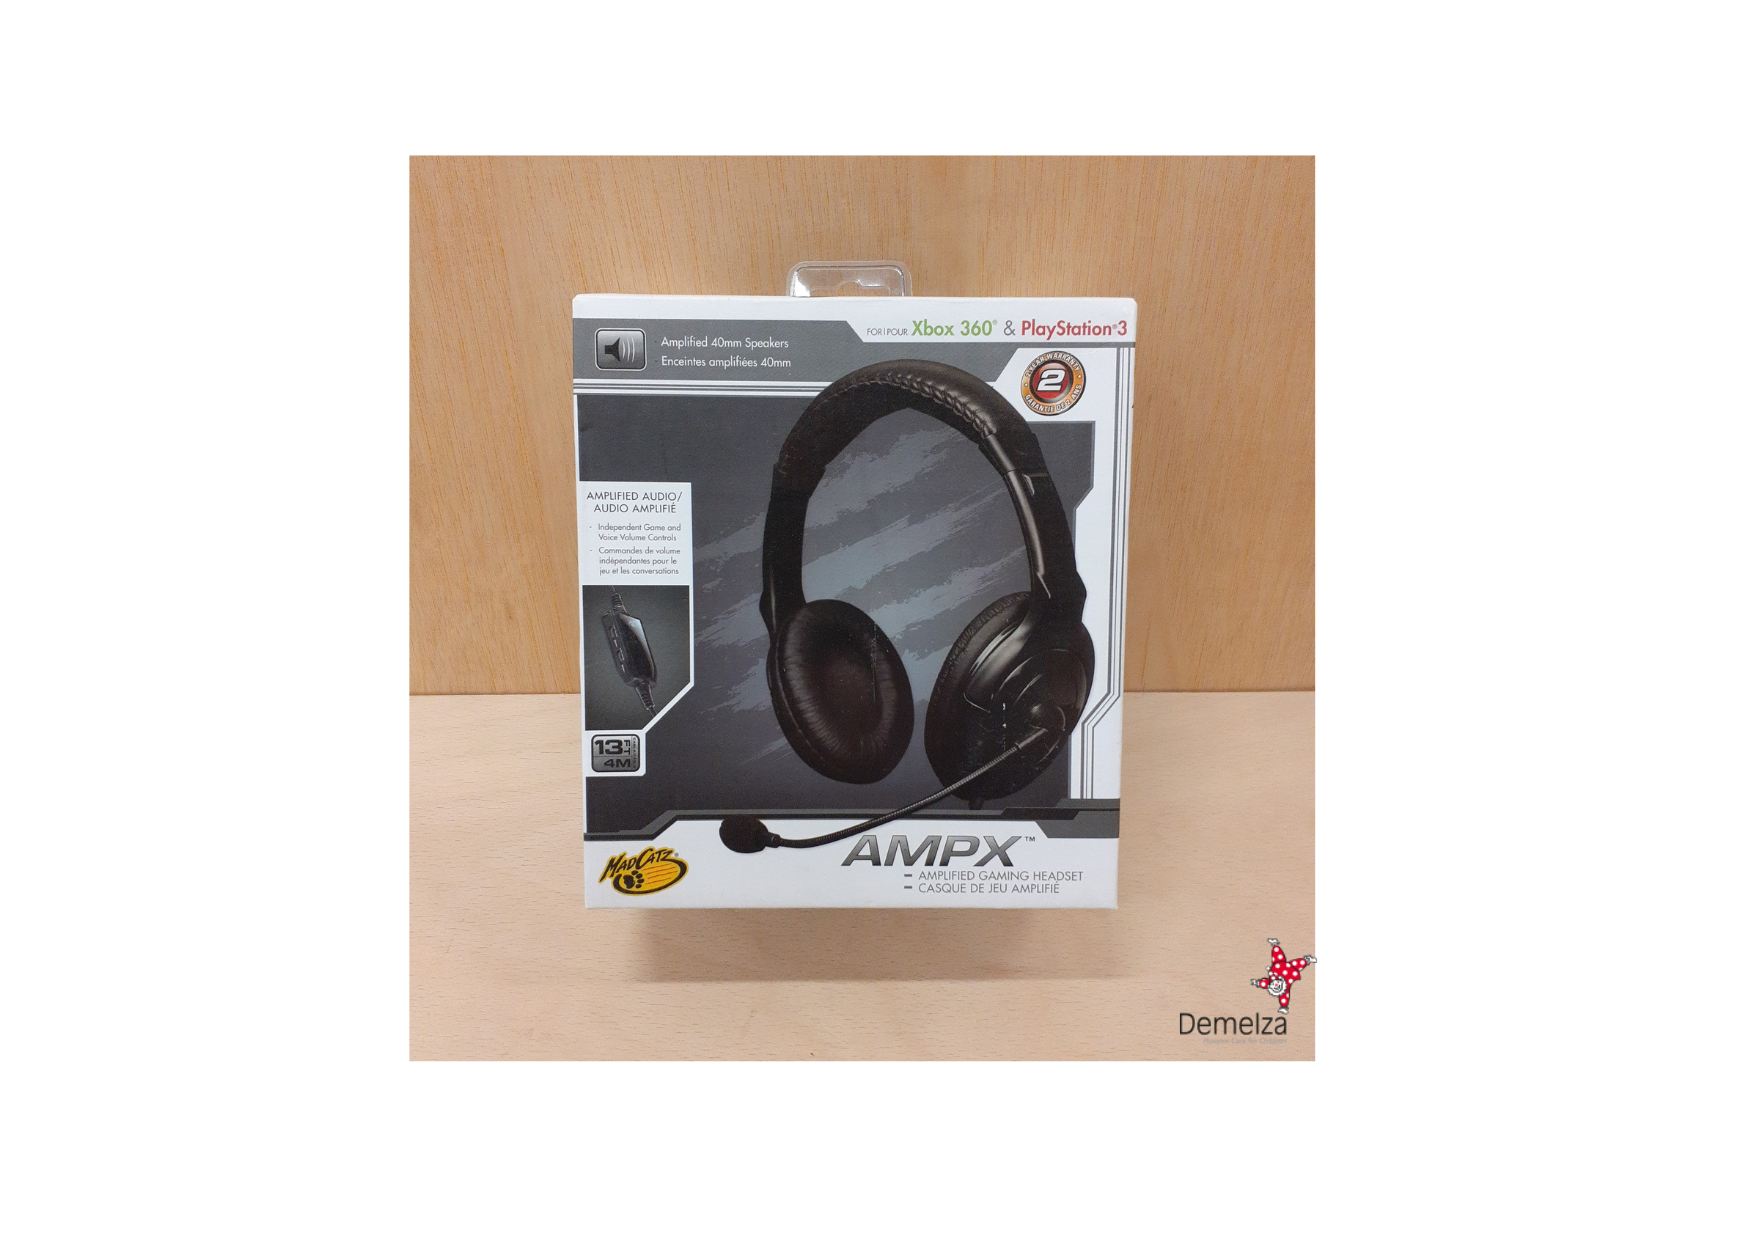 Box for Black AMPX Mad Catz Amplified Wired Gaming Headset 